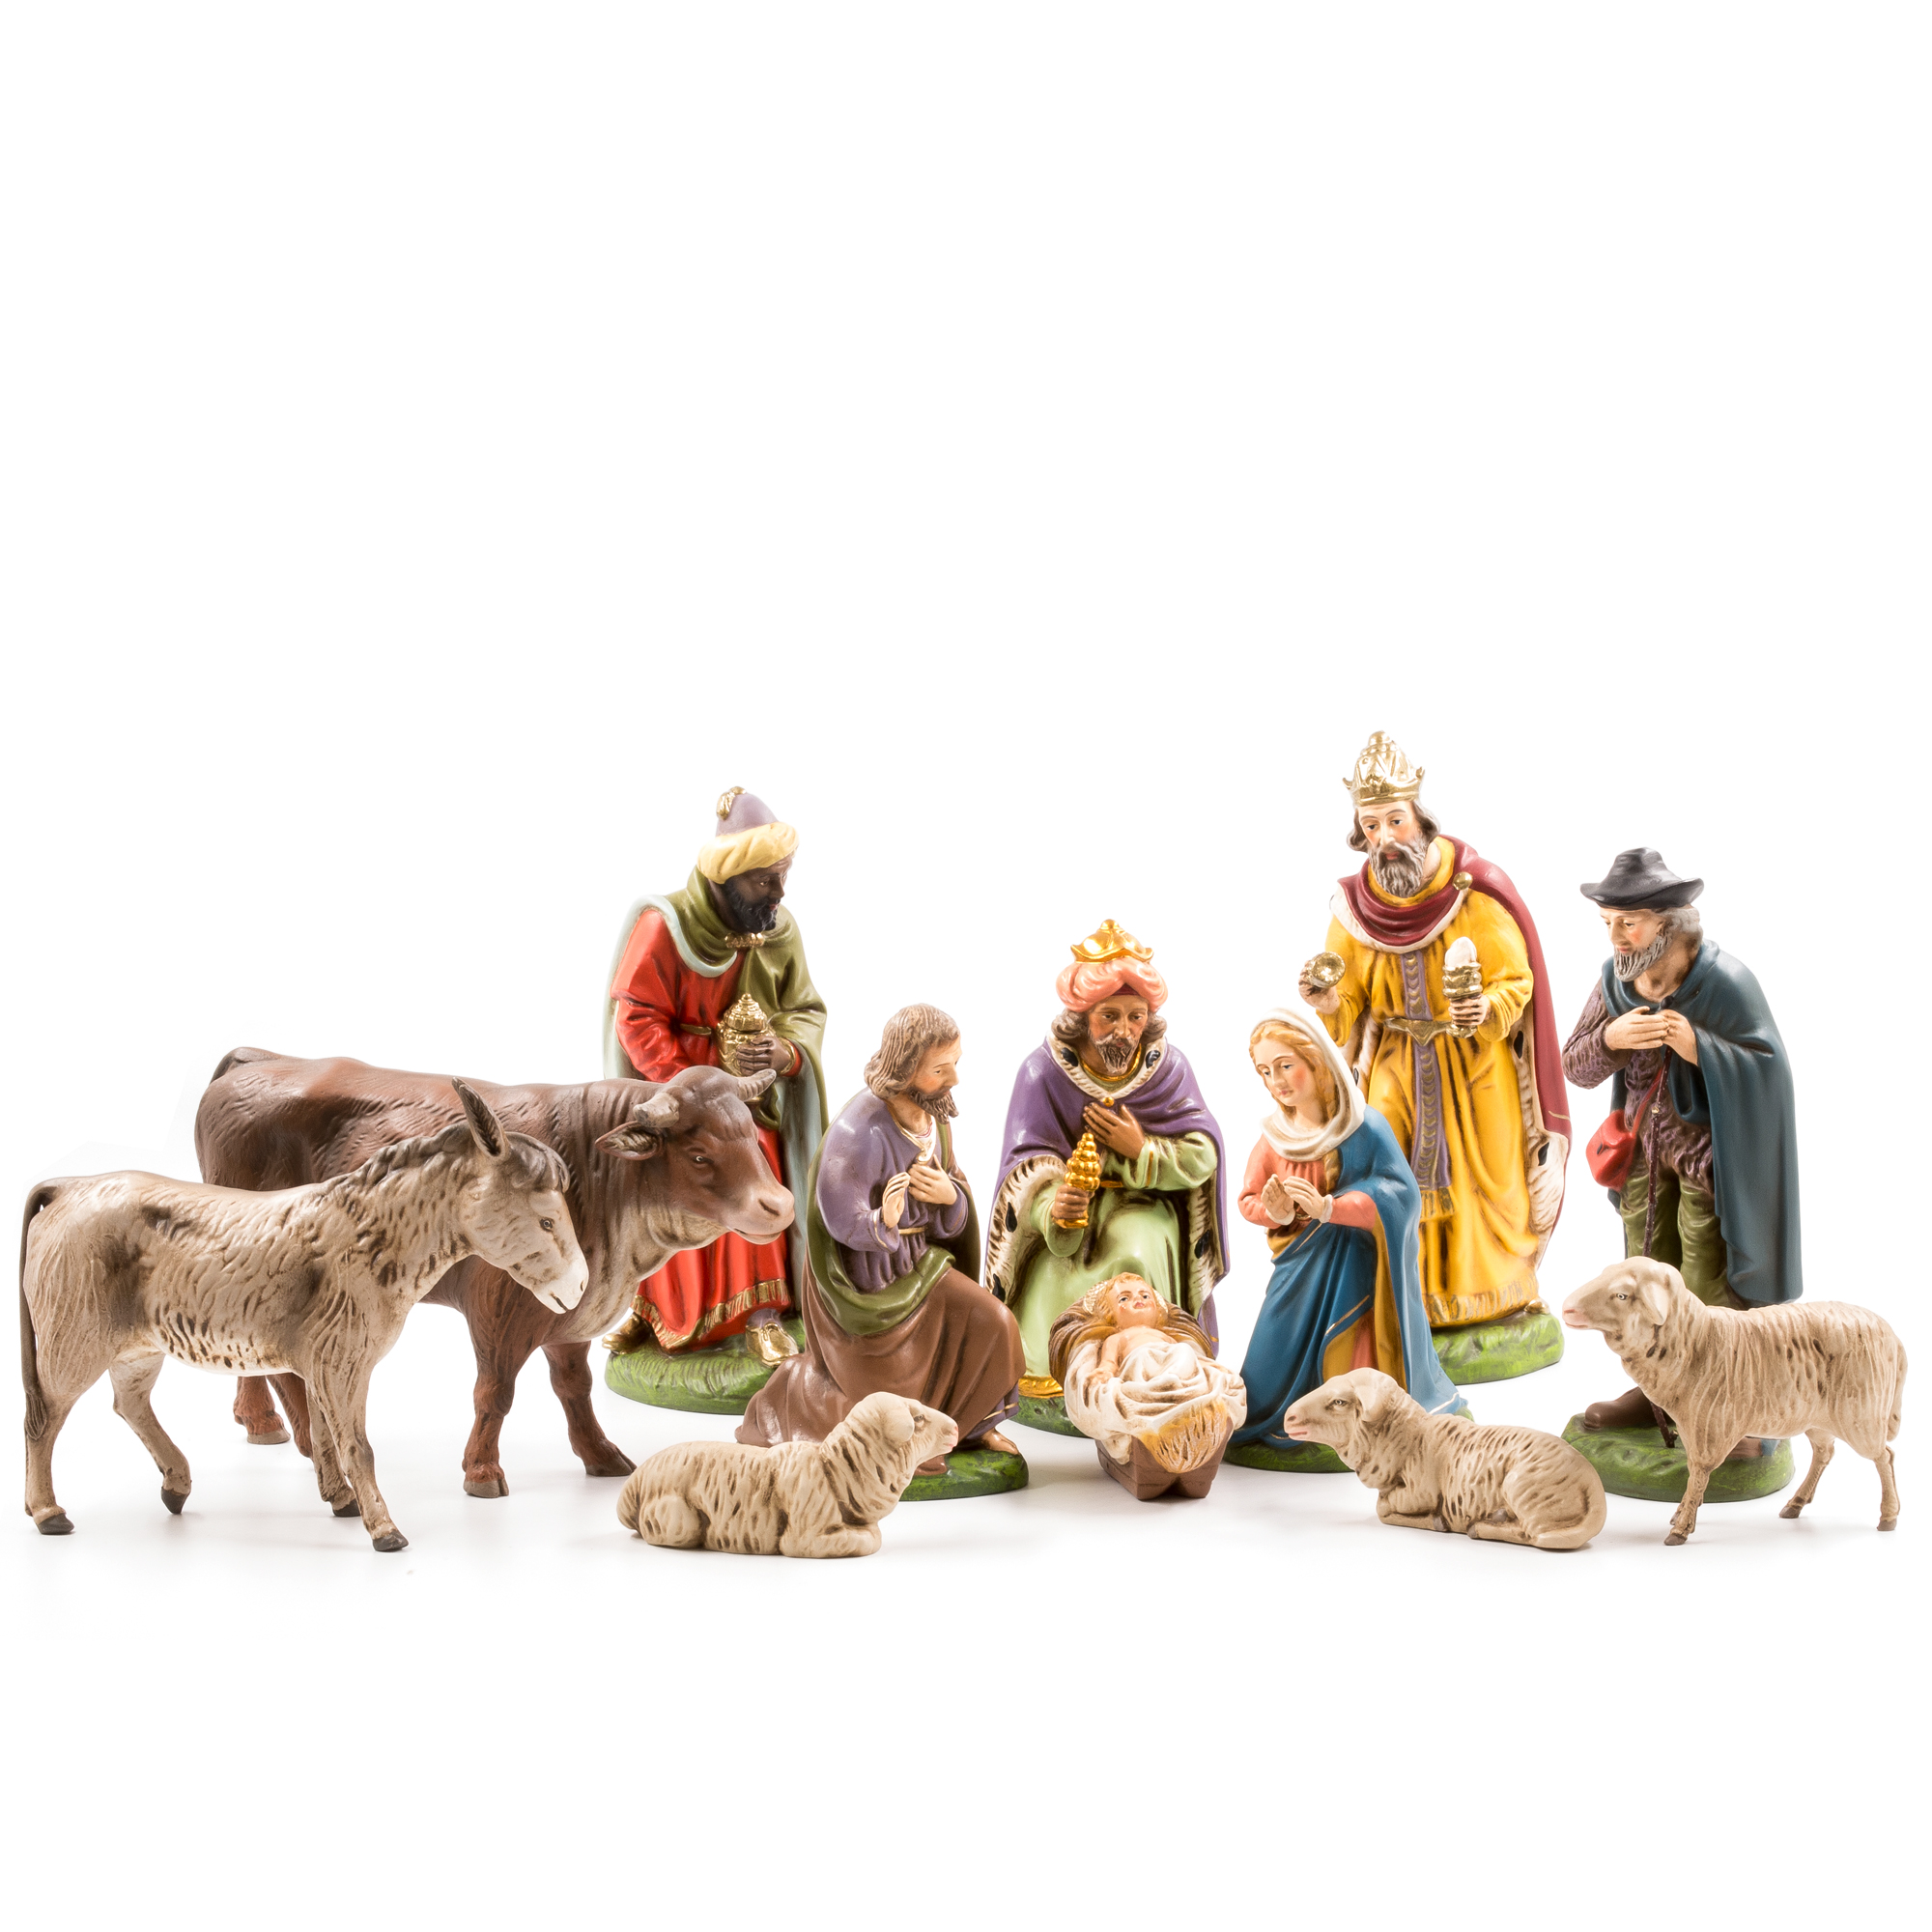 Nativity set with 12 figures, to 6.75 in. figure size